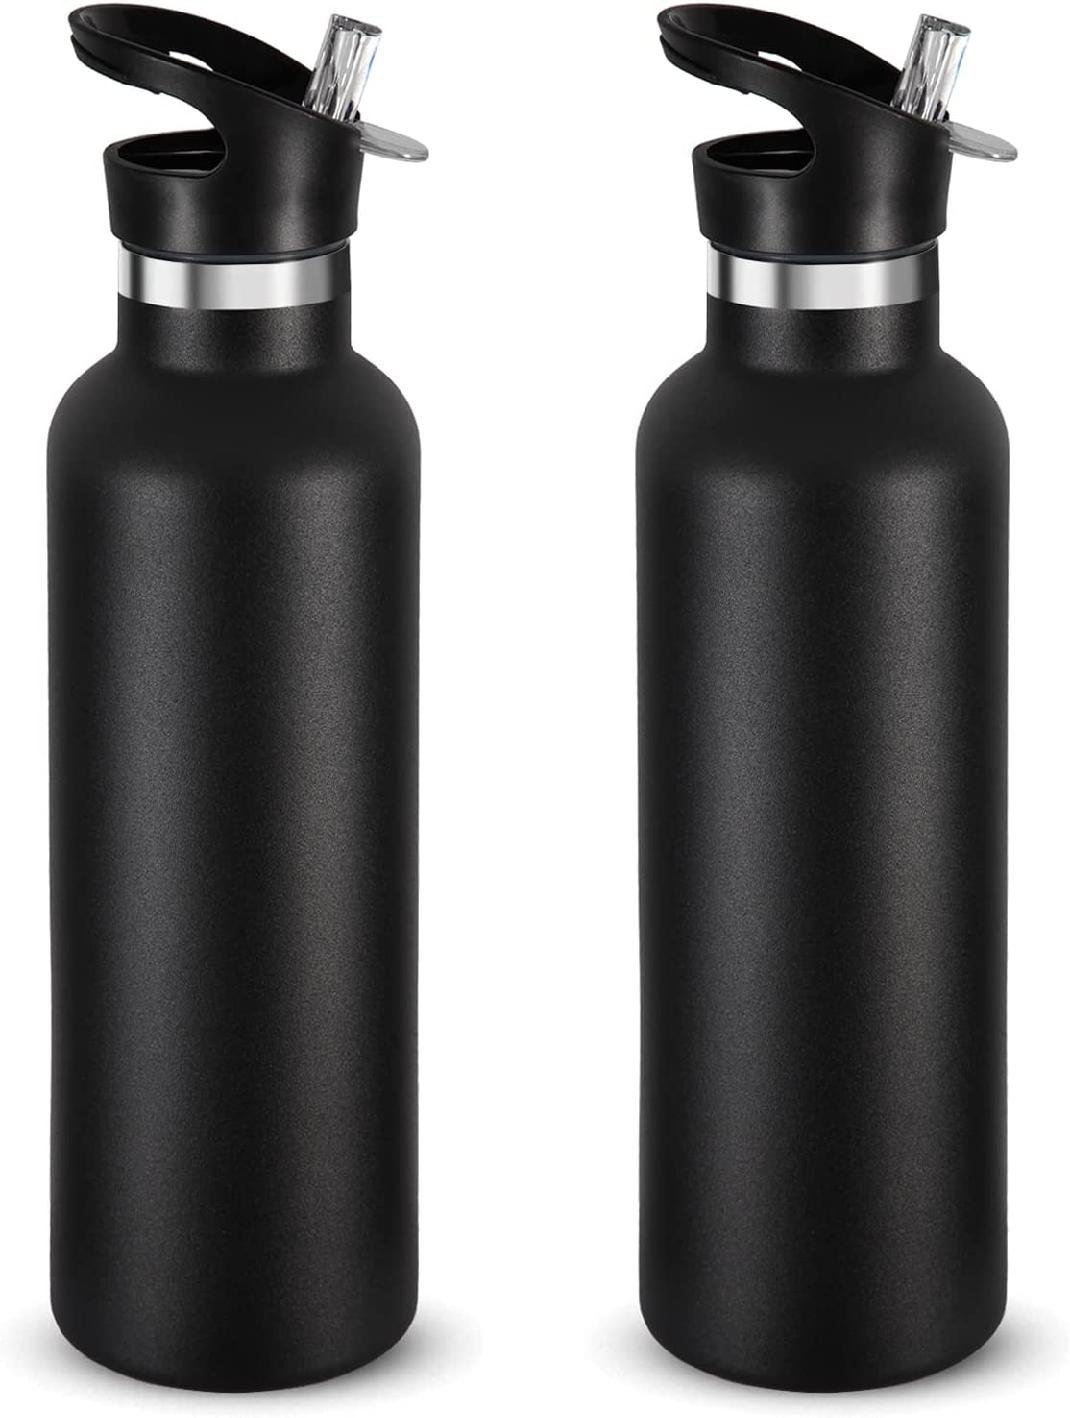 Orchids Aquae 24oz. Insulated Stainless Steel Water Bottle Straw